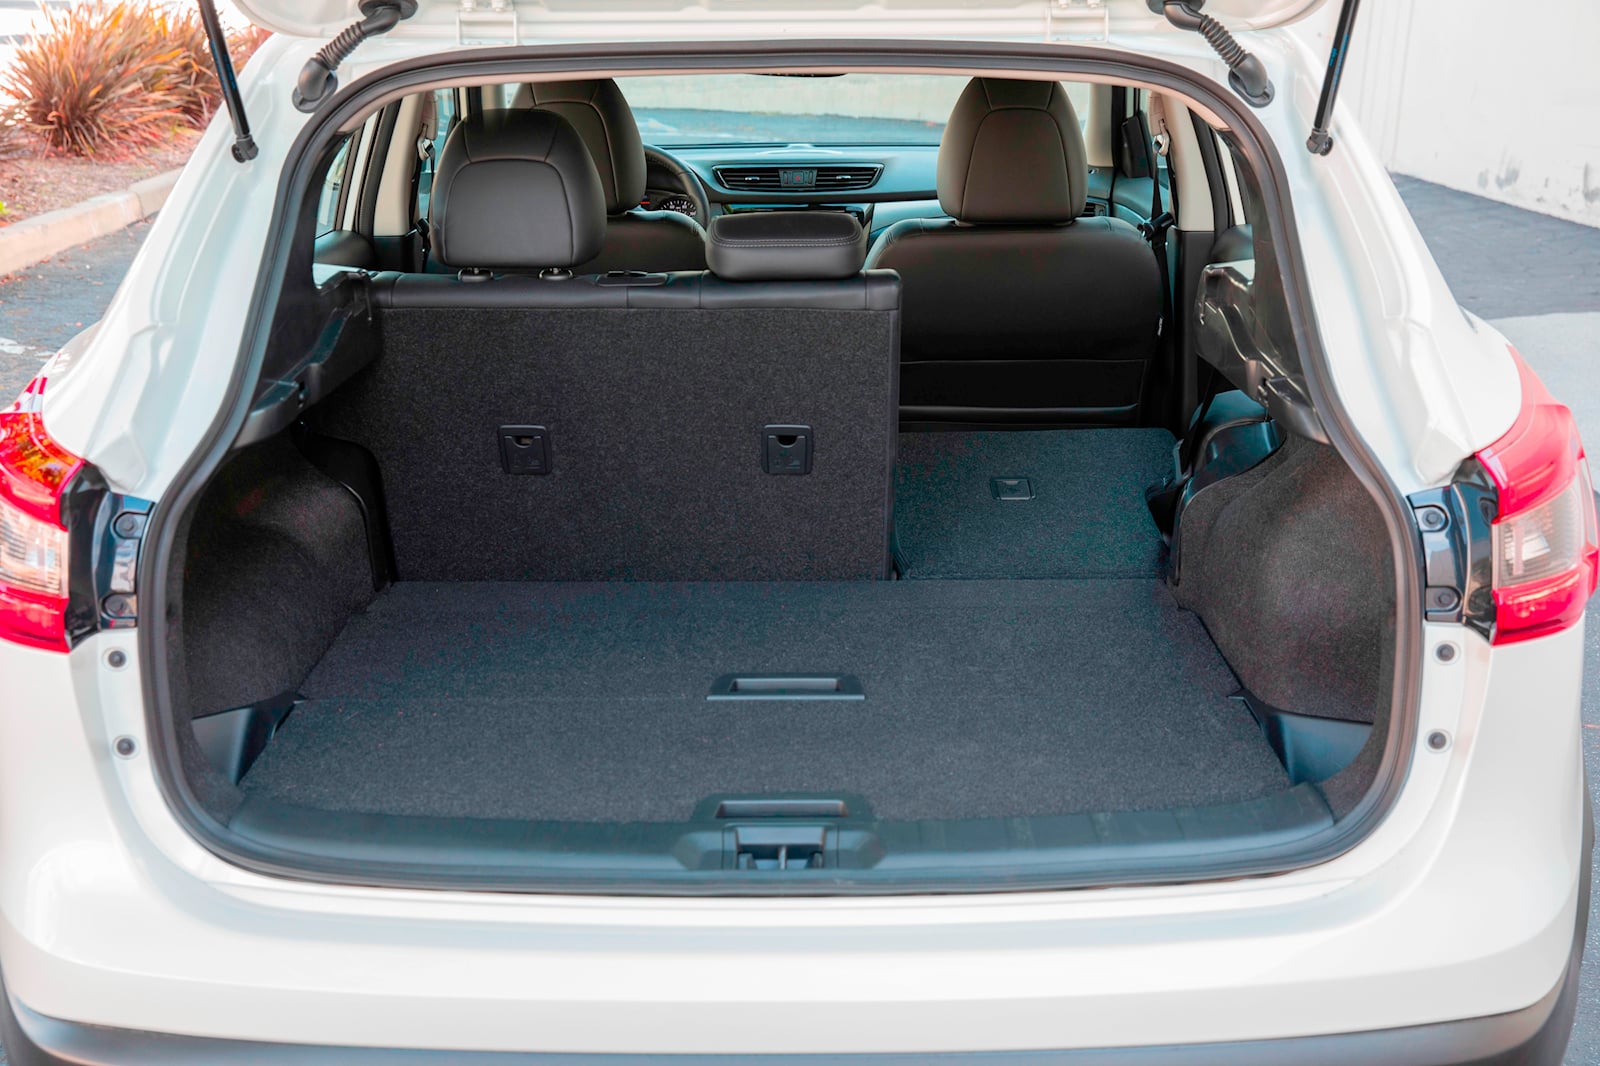 2022 Nissan Rogue Sport Interior Dimensions Seating, Cargo Space